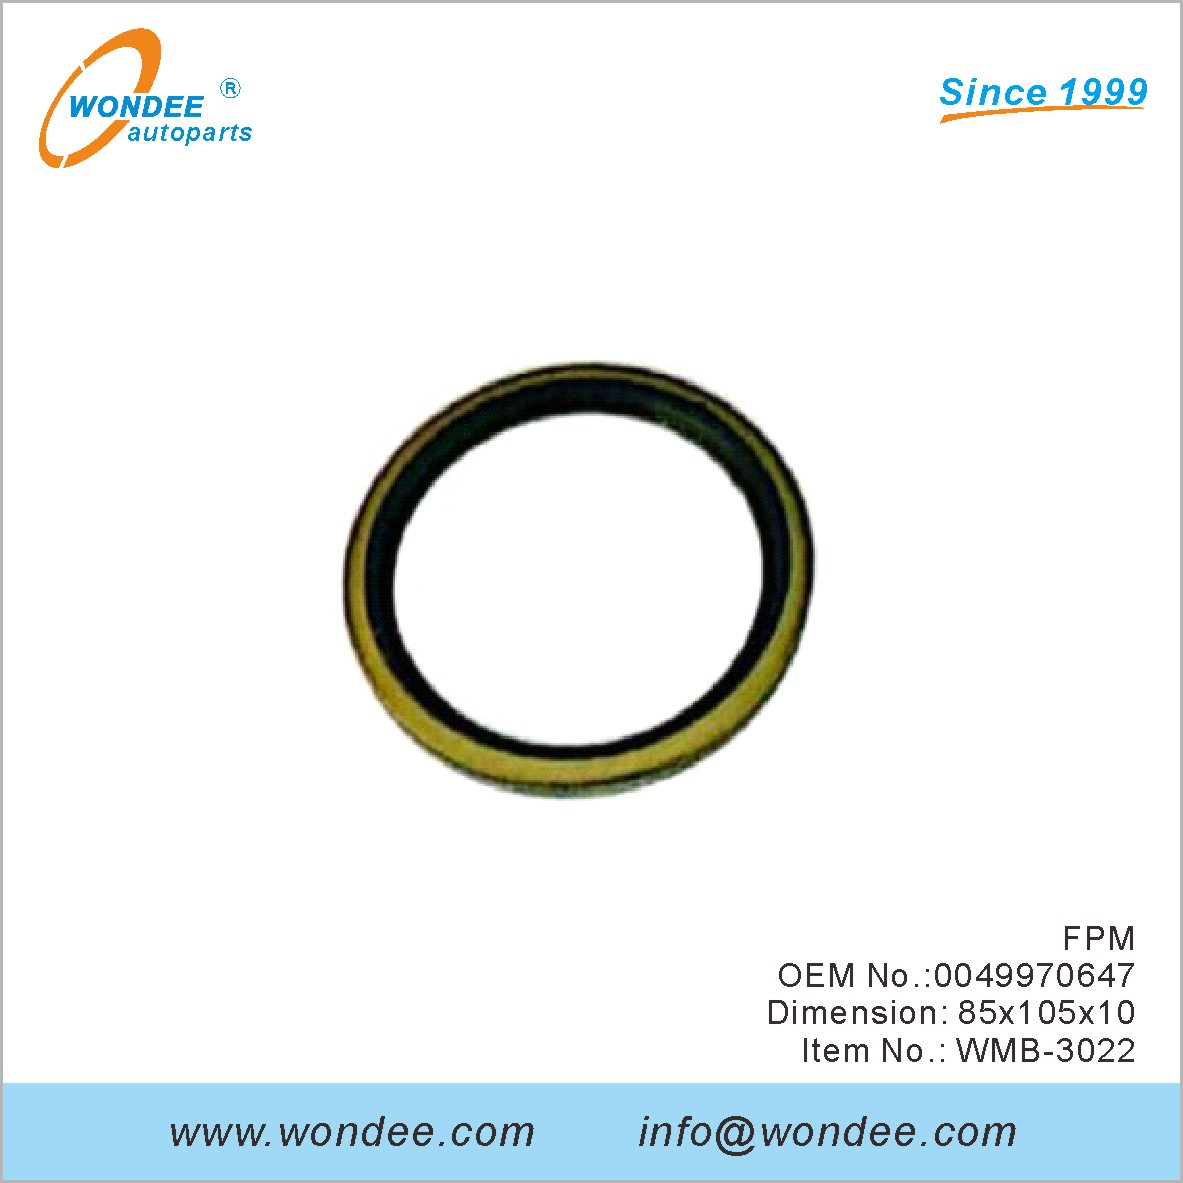 FPM OEM 0049970647 for Benz from WONDEE